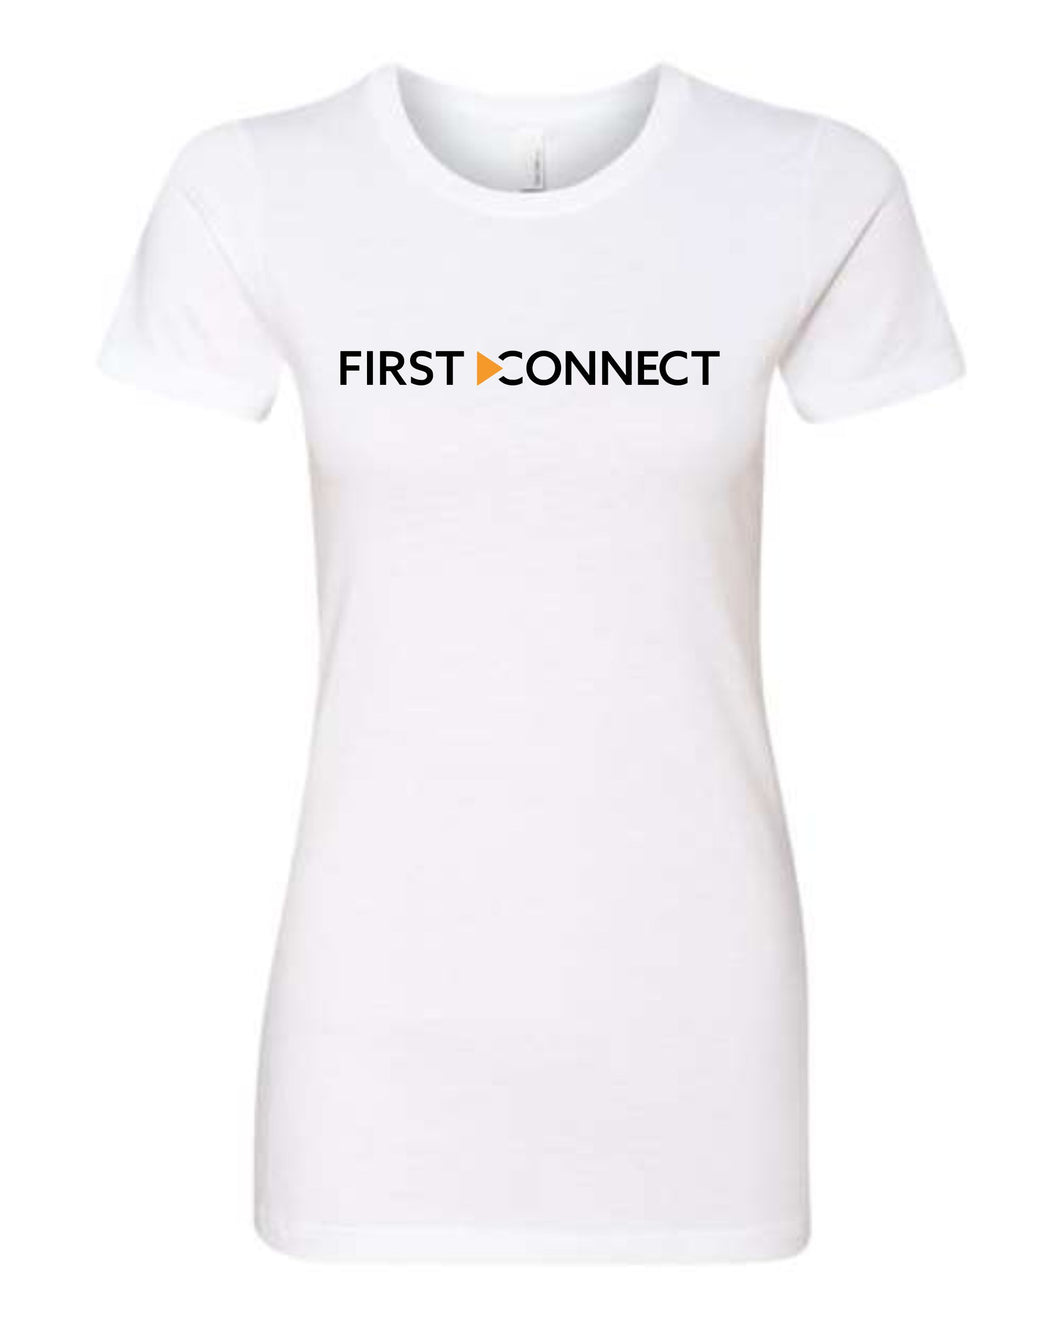 First Connect Women's White T-Shirt